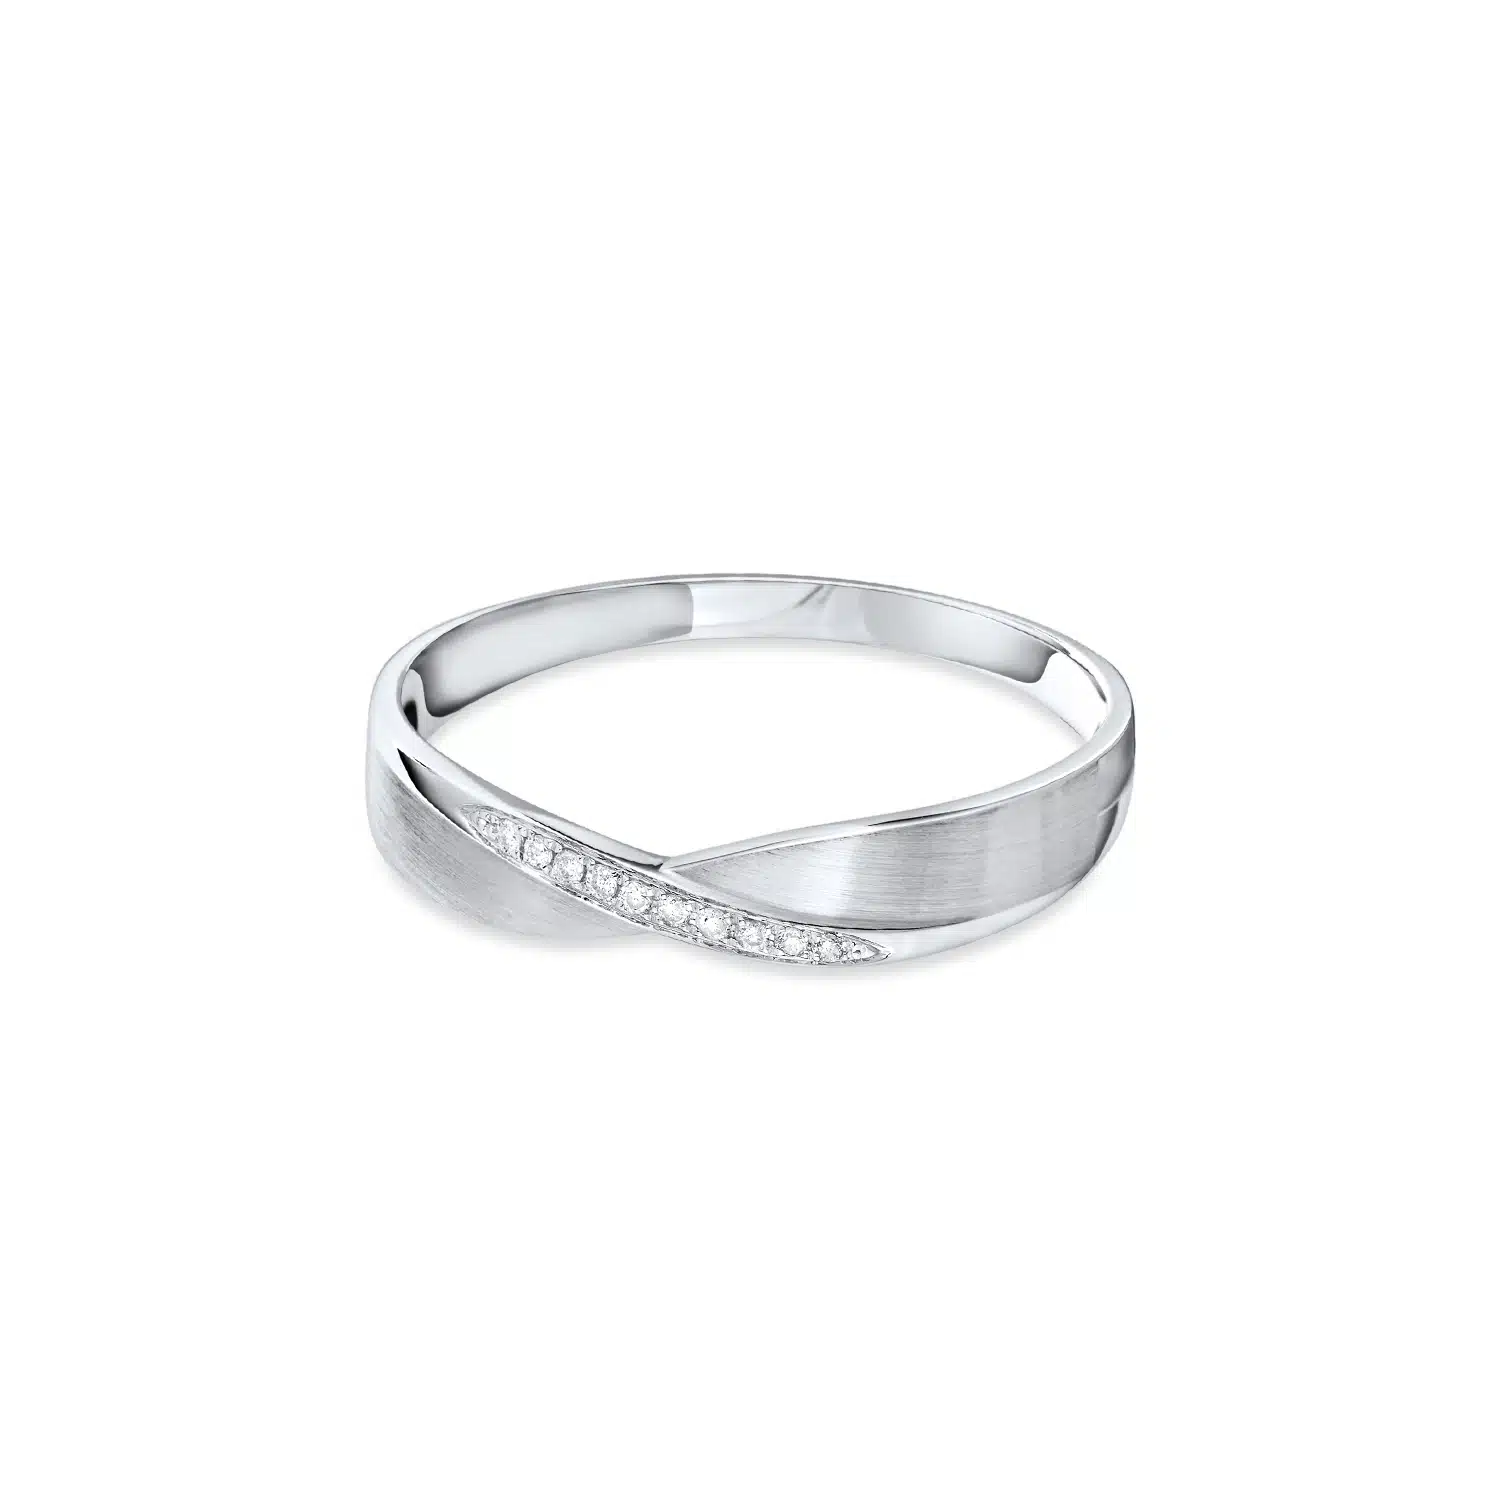 MOMENTO INFINITY OF LOVE celebrate a lifetime of love 14k WHITE GOLD totalling 0.03 carat weight WEDDING BAND